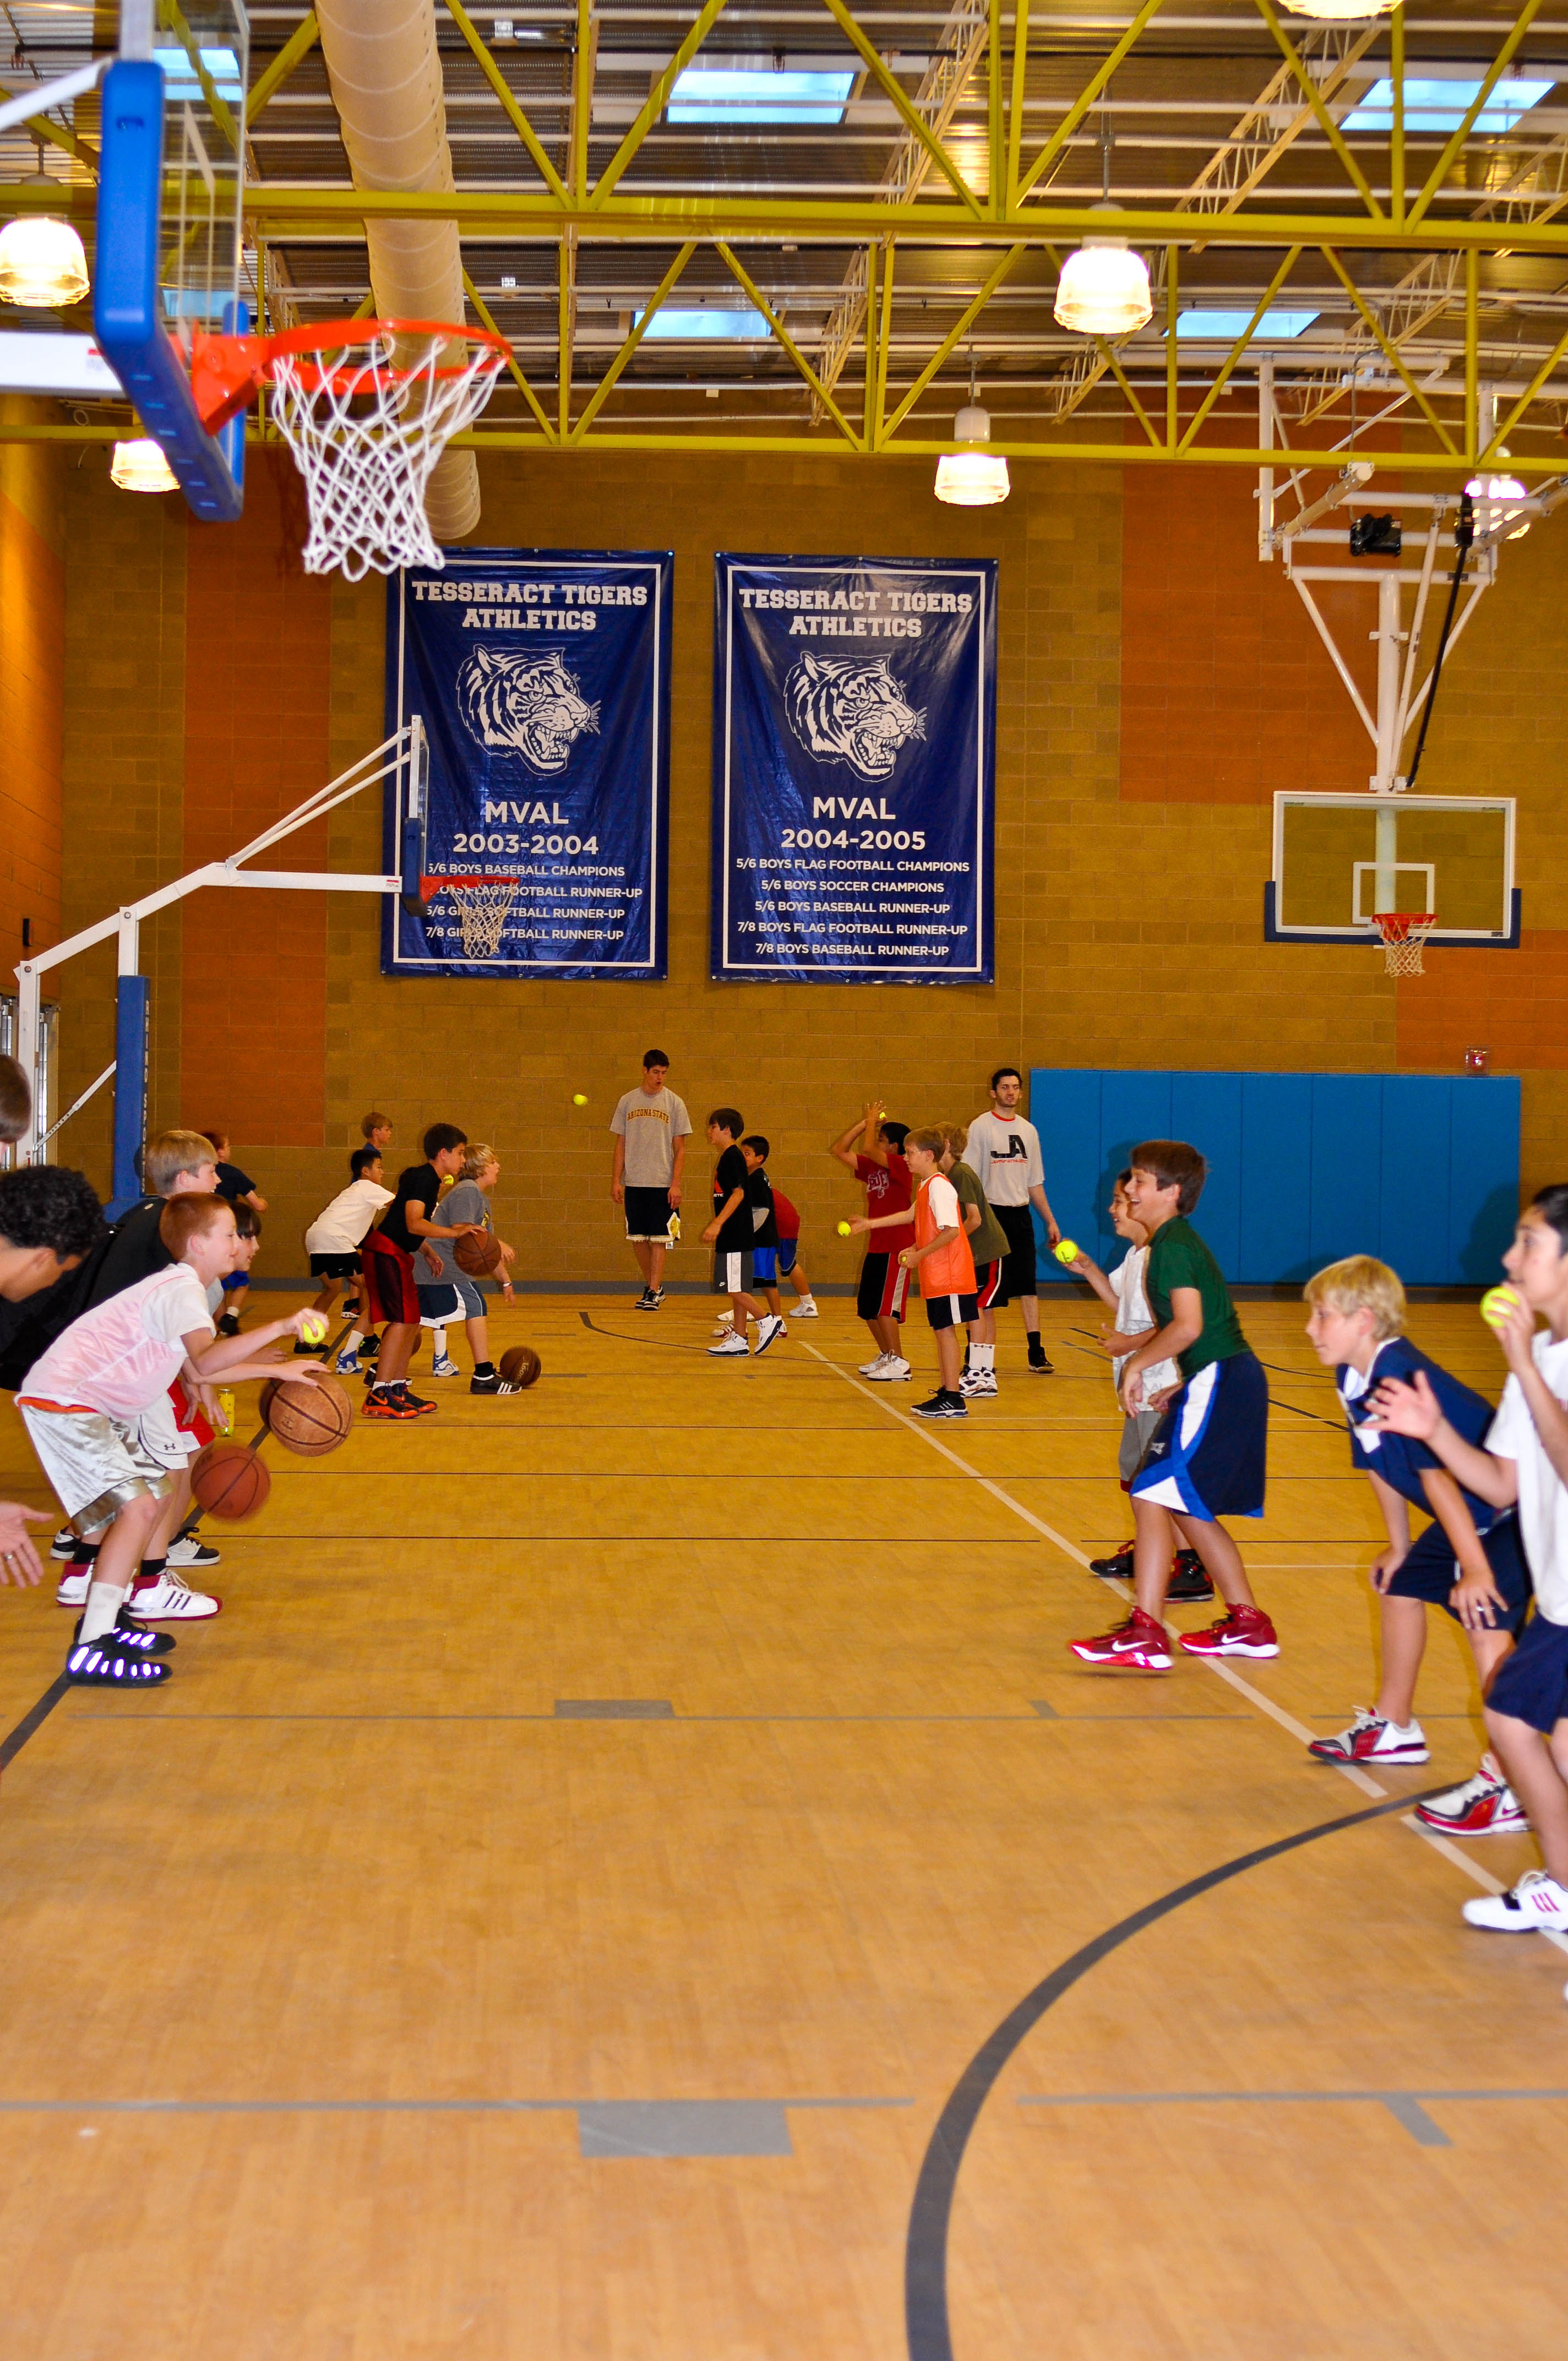 training basketball academy youth athletic jump club winter holding phoenix held 2009 member center tryouts league competitive registrations thurs centrally